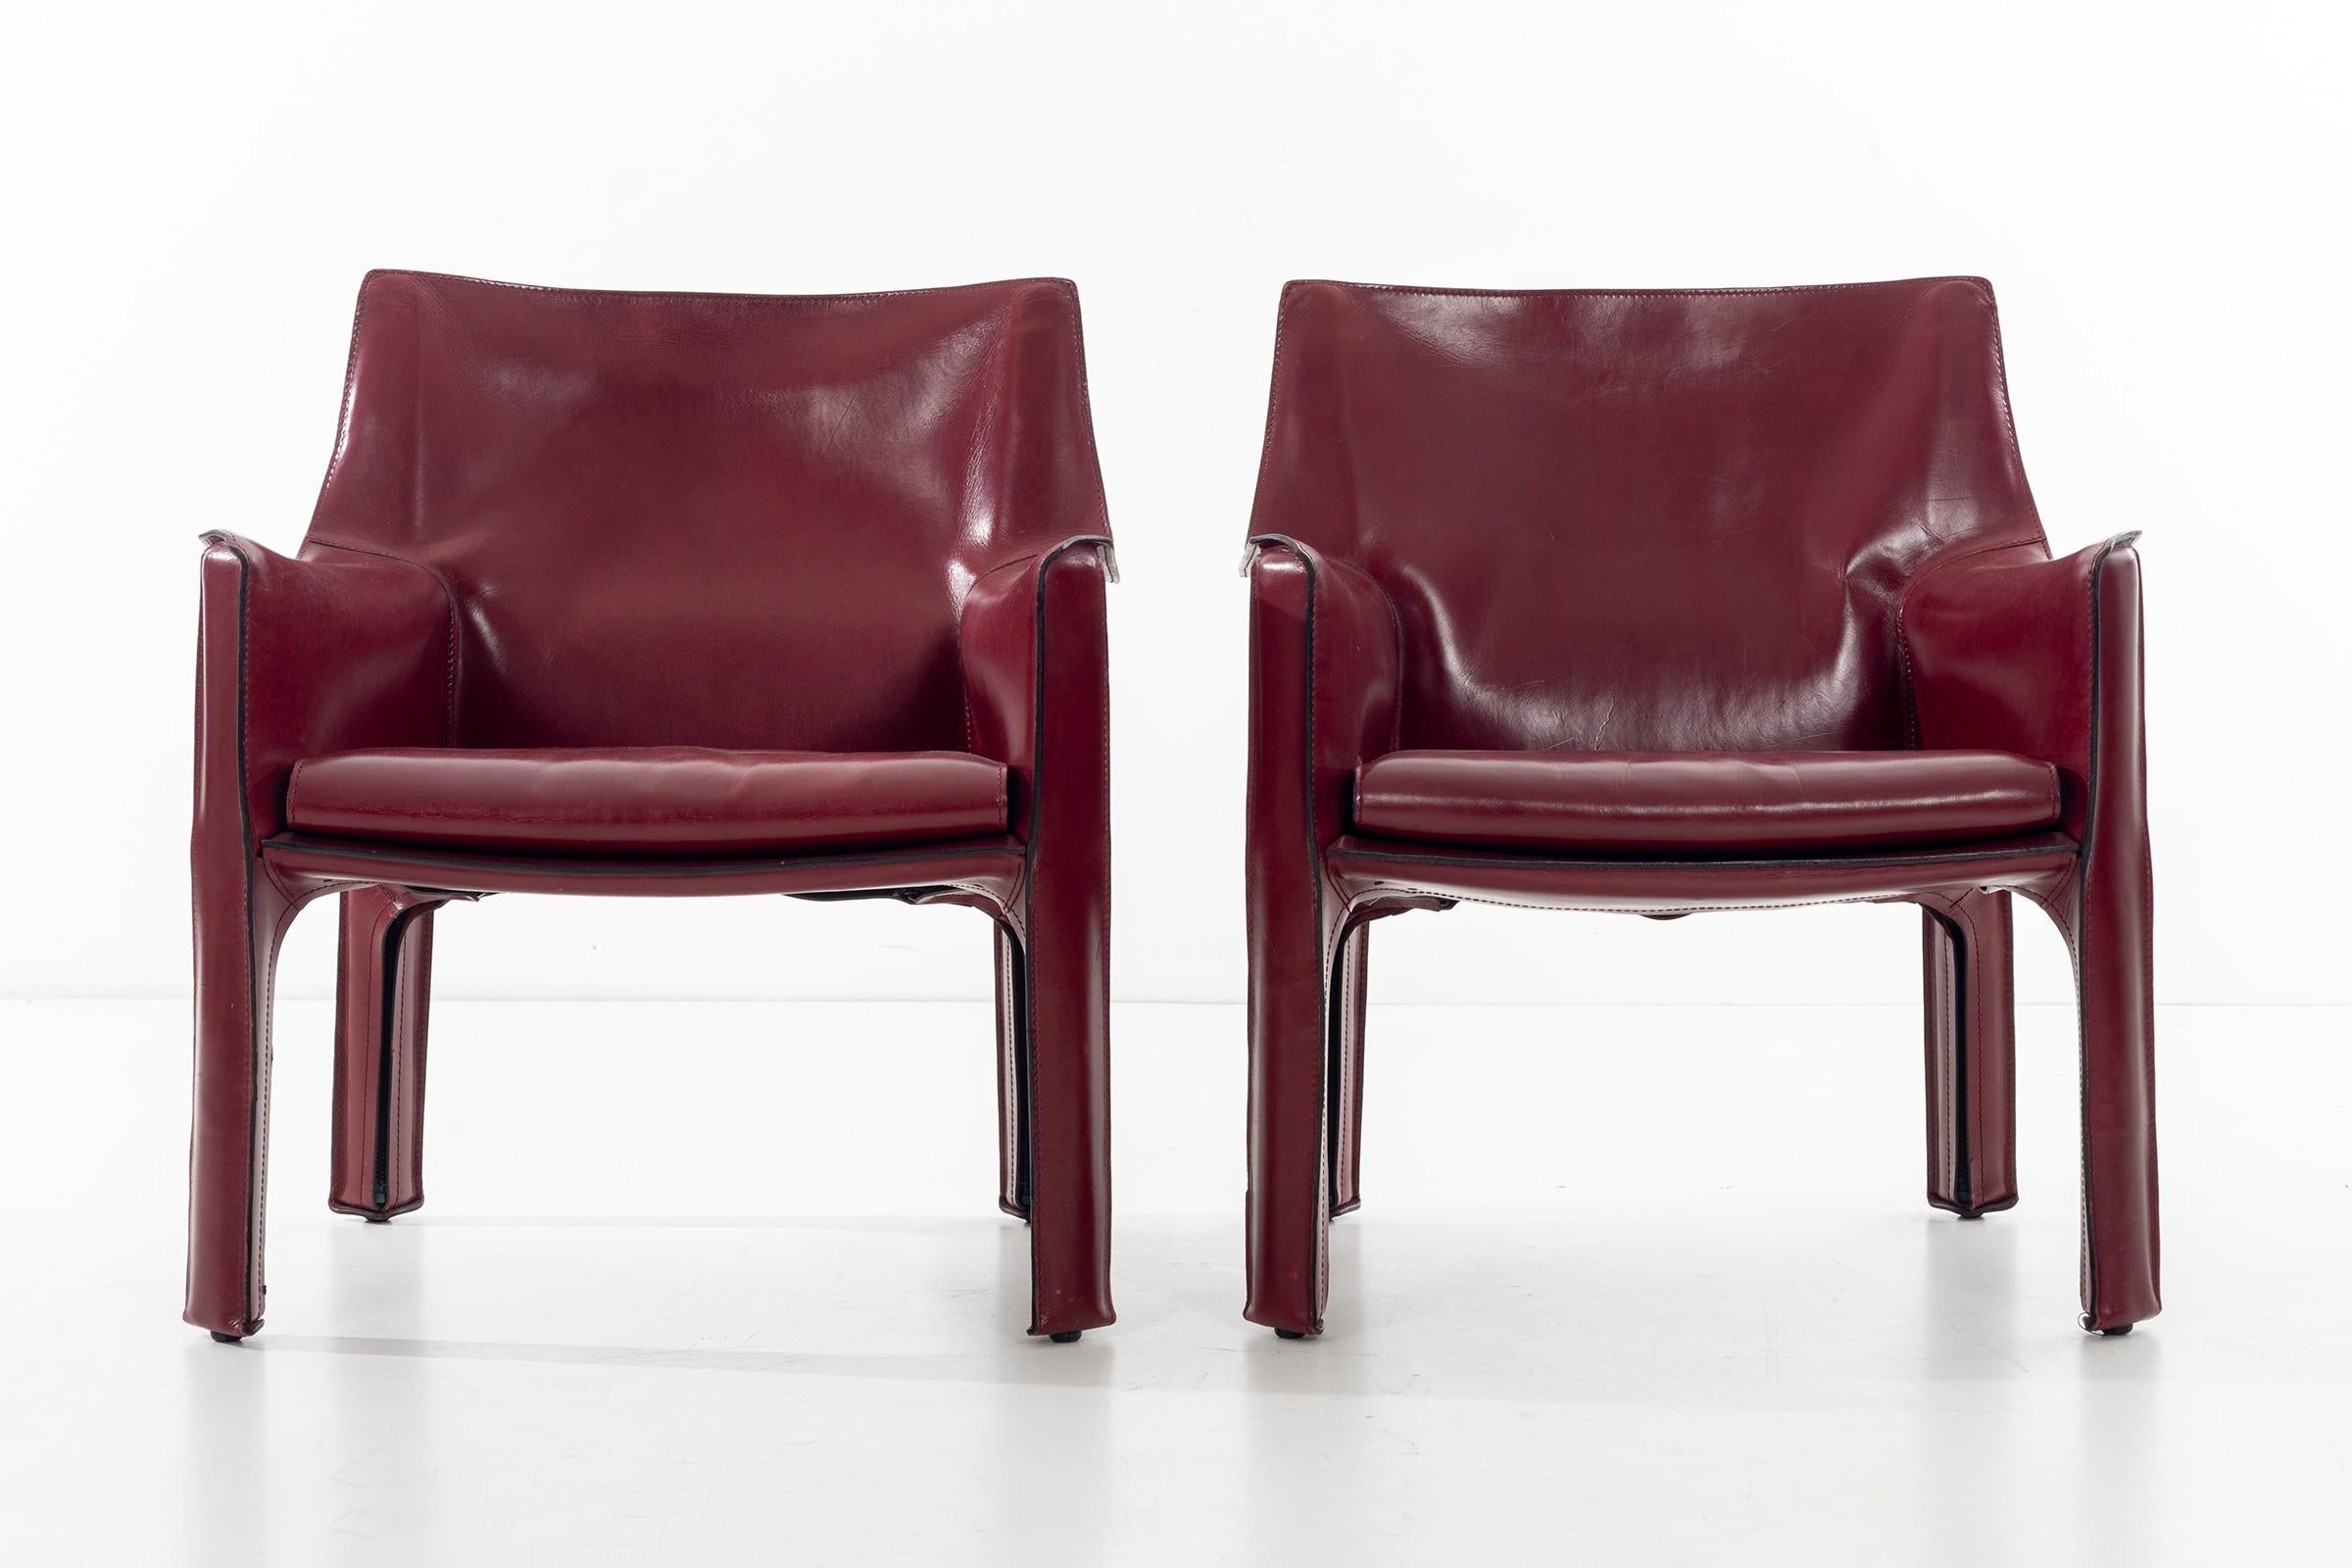 Bellini for Cassina, cab chairs in oxblood Italian leather, high-quality chairs consists of a leather cover stretched over a minimal tubular steel frame. The only additional reinforcement is provided by a rubber membrane plate that supports the